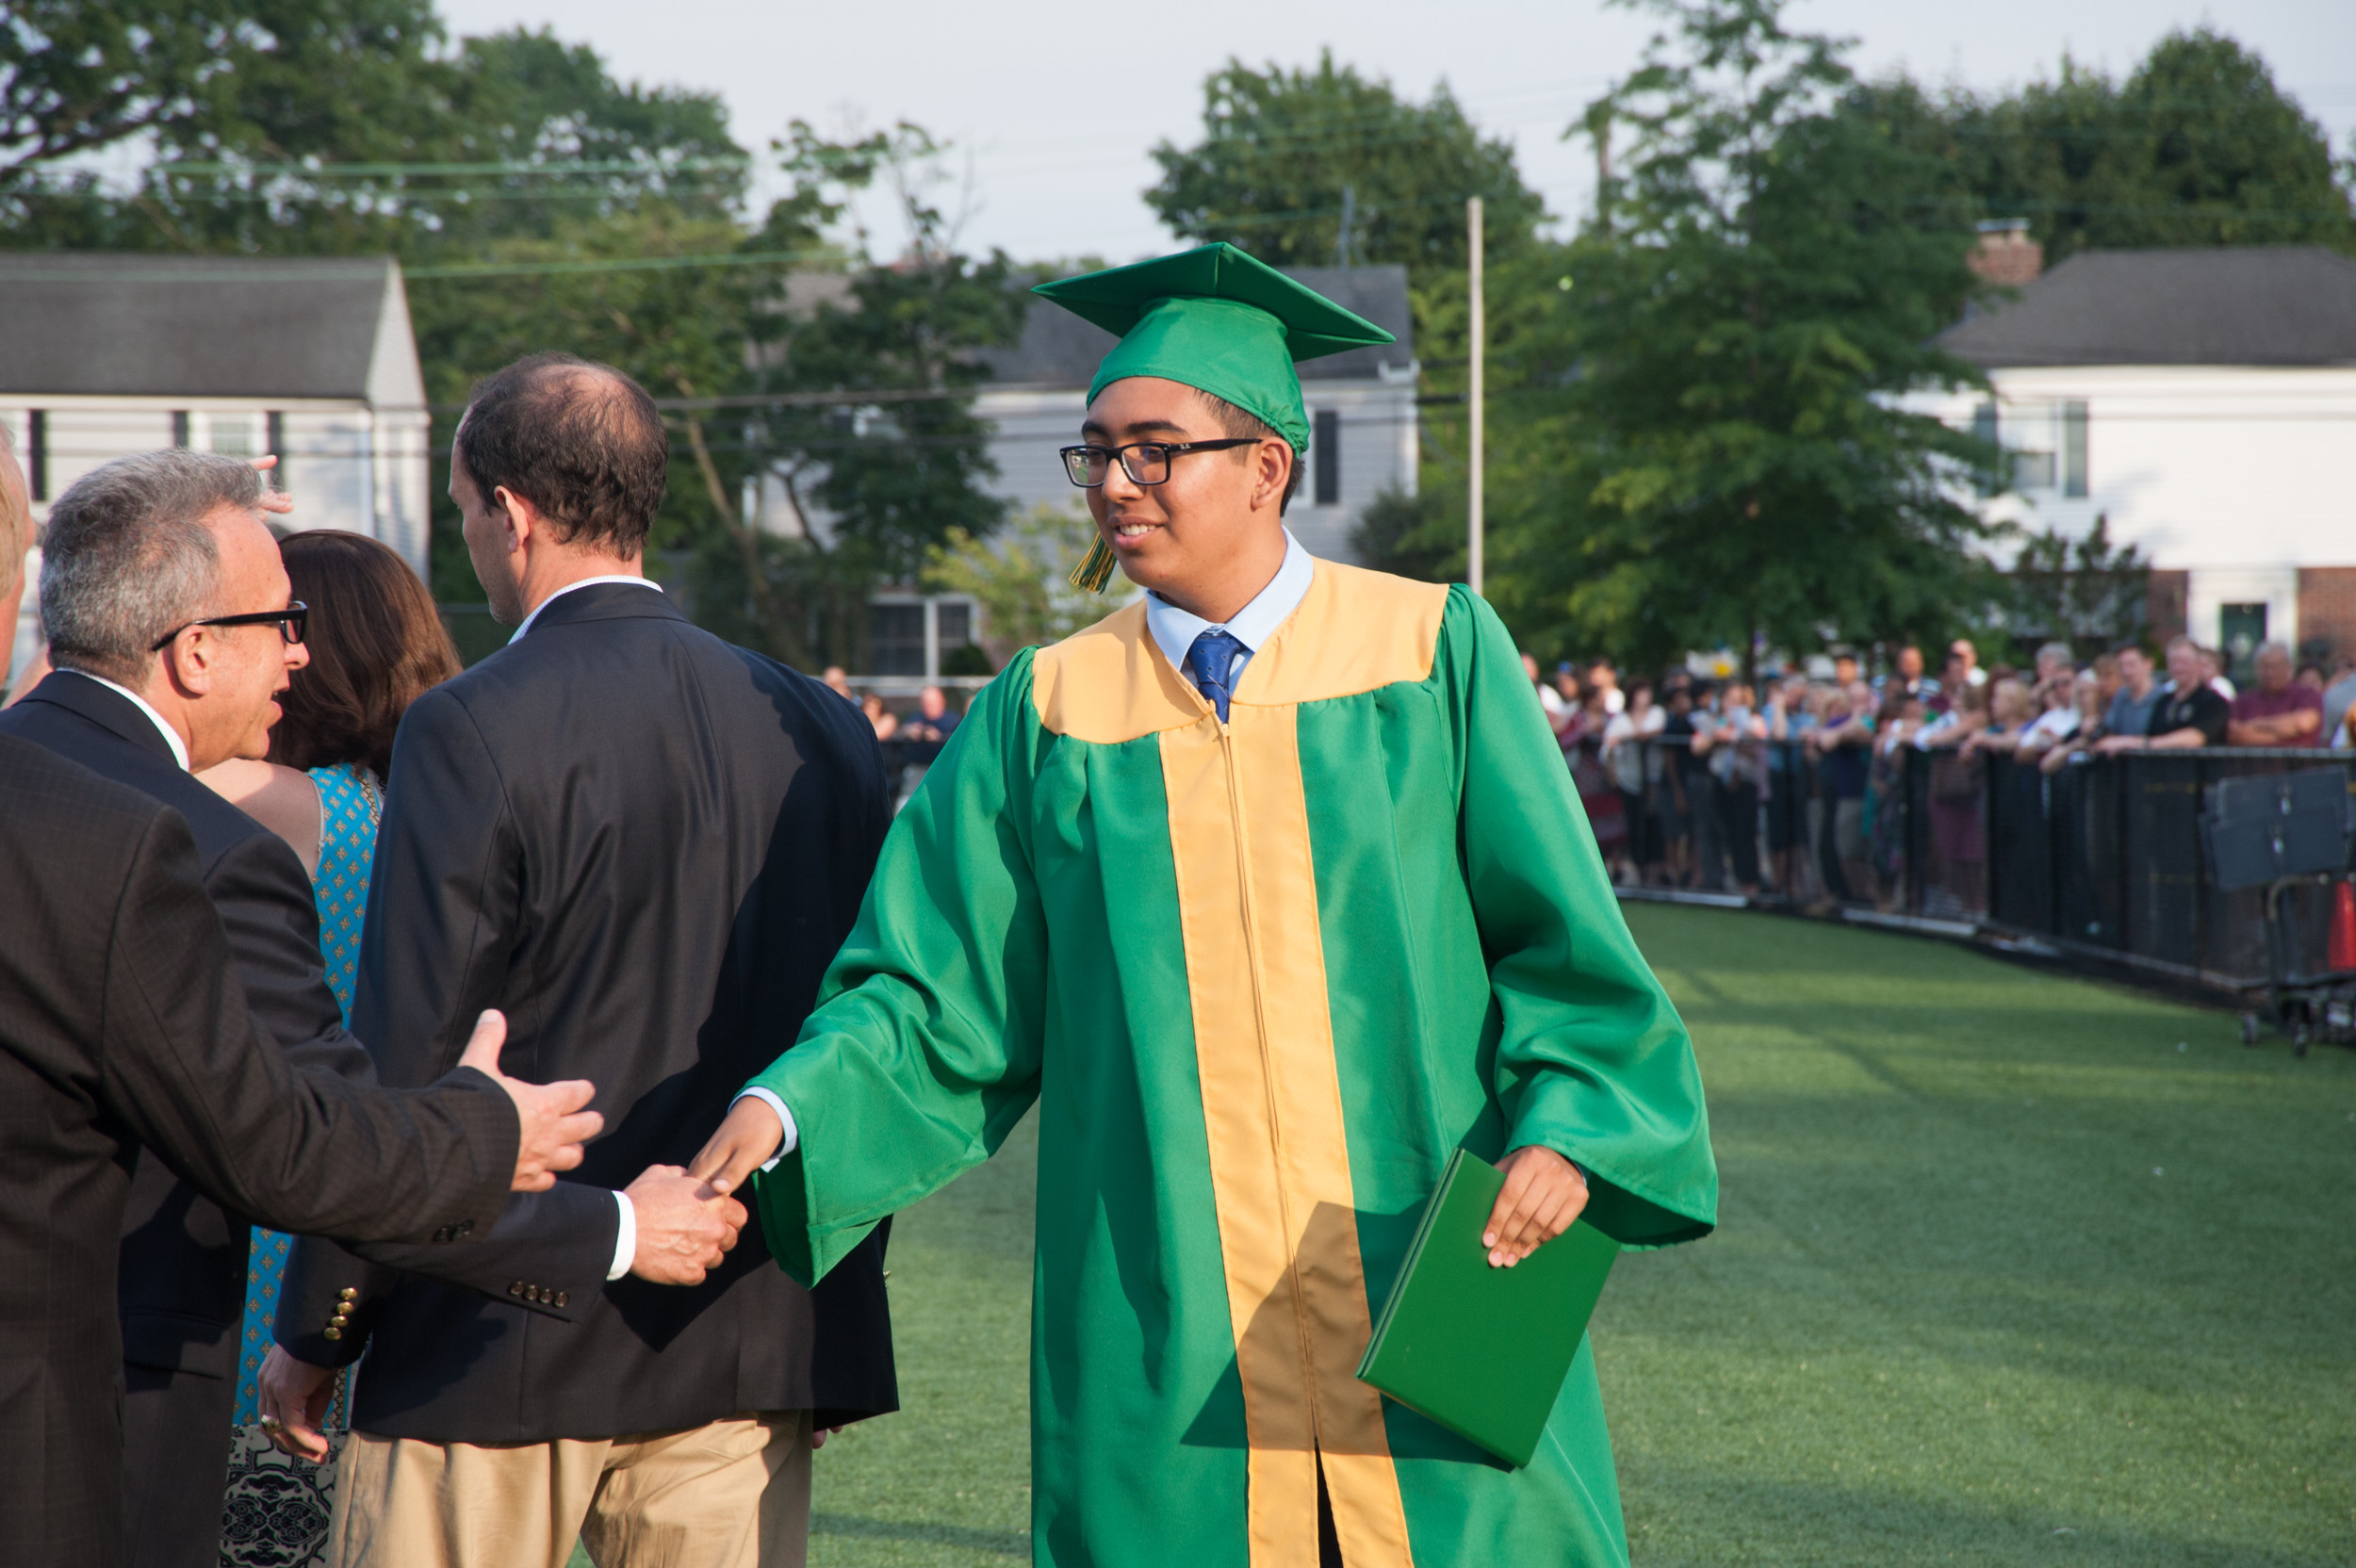 A graduate was congratulated after receiving his diploma.